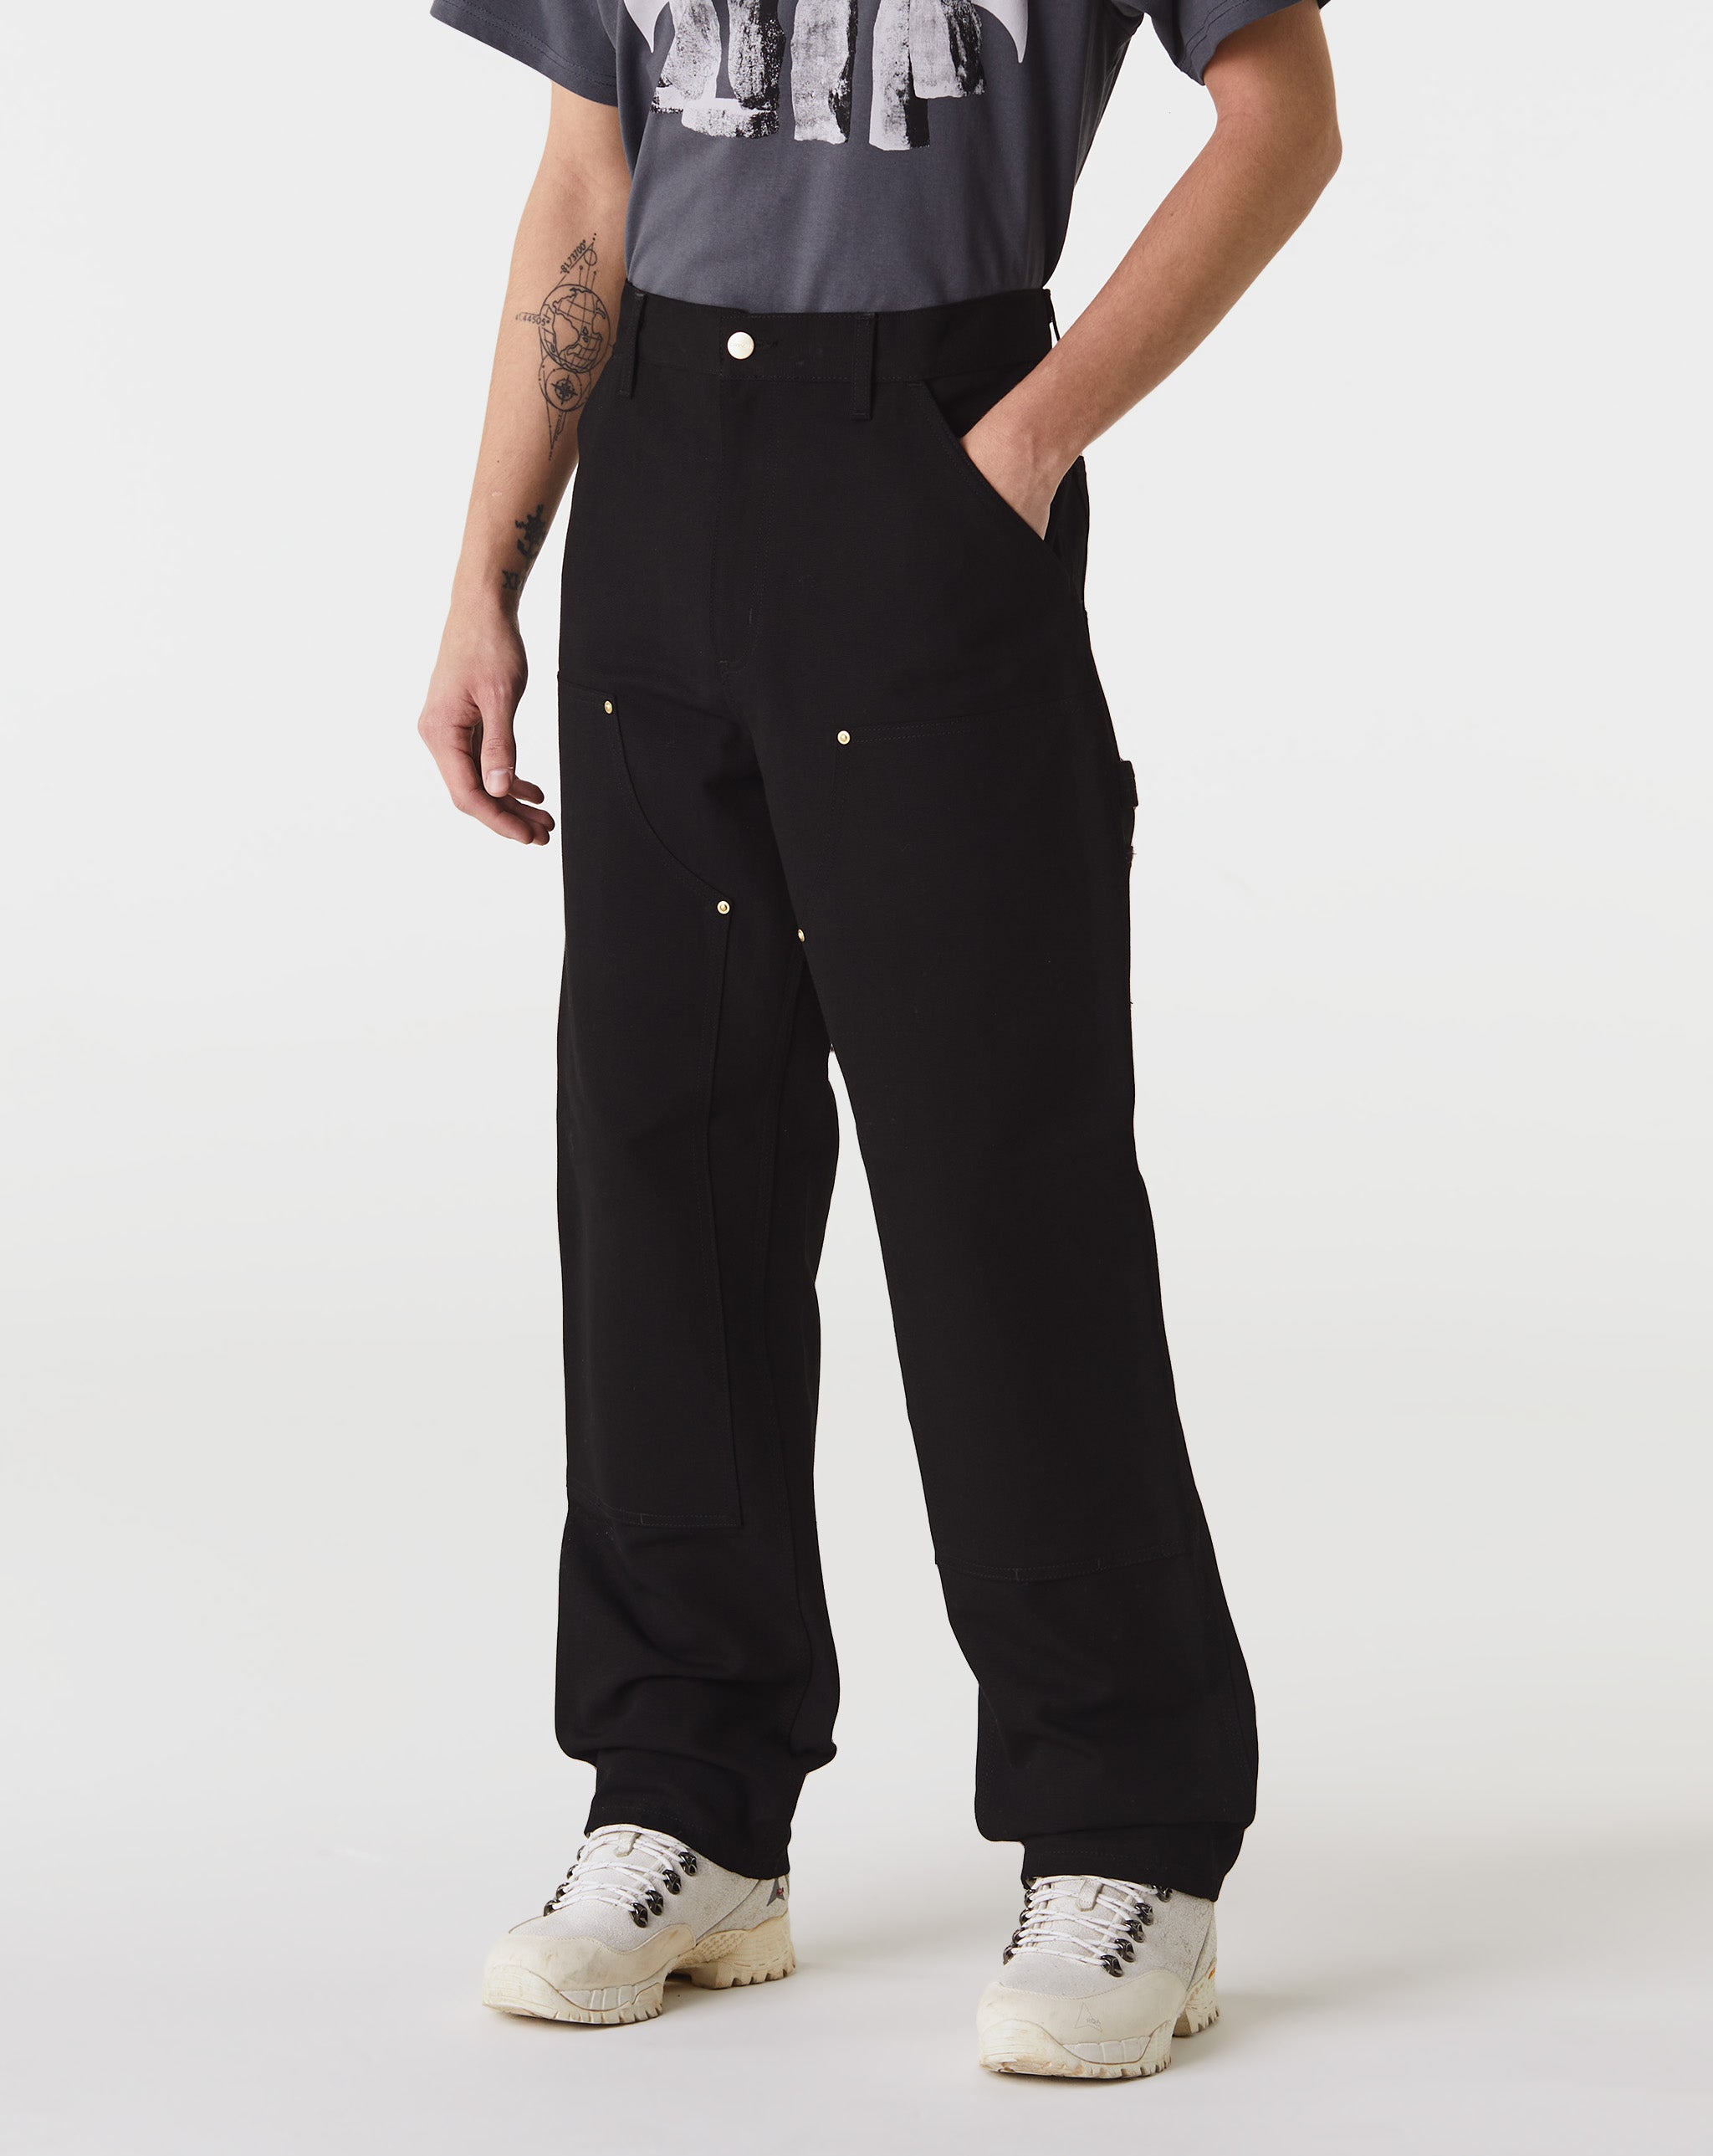 Carhartt WIP I agree with the  - Cheap Cerbe Jordan outlet